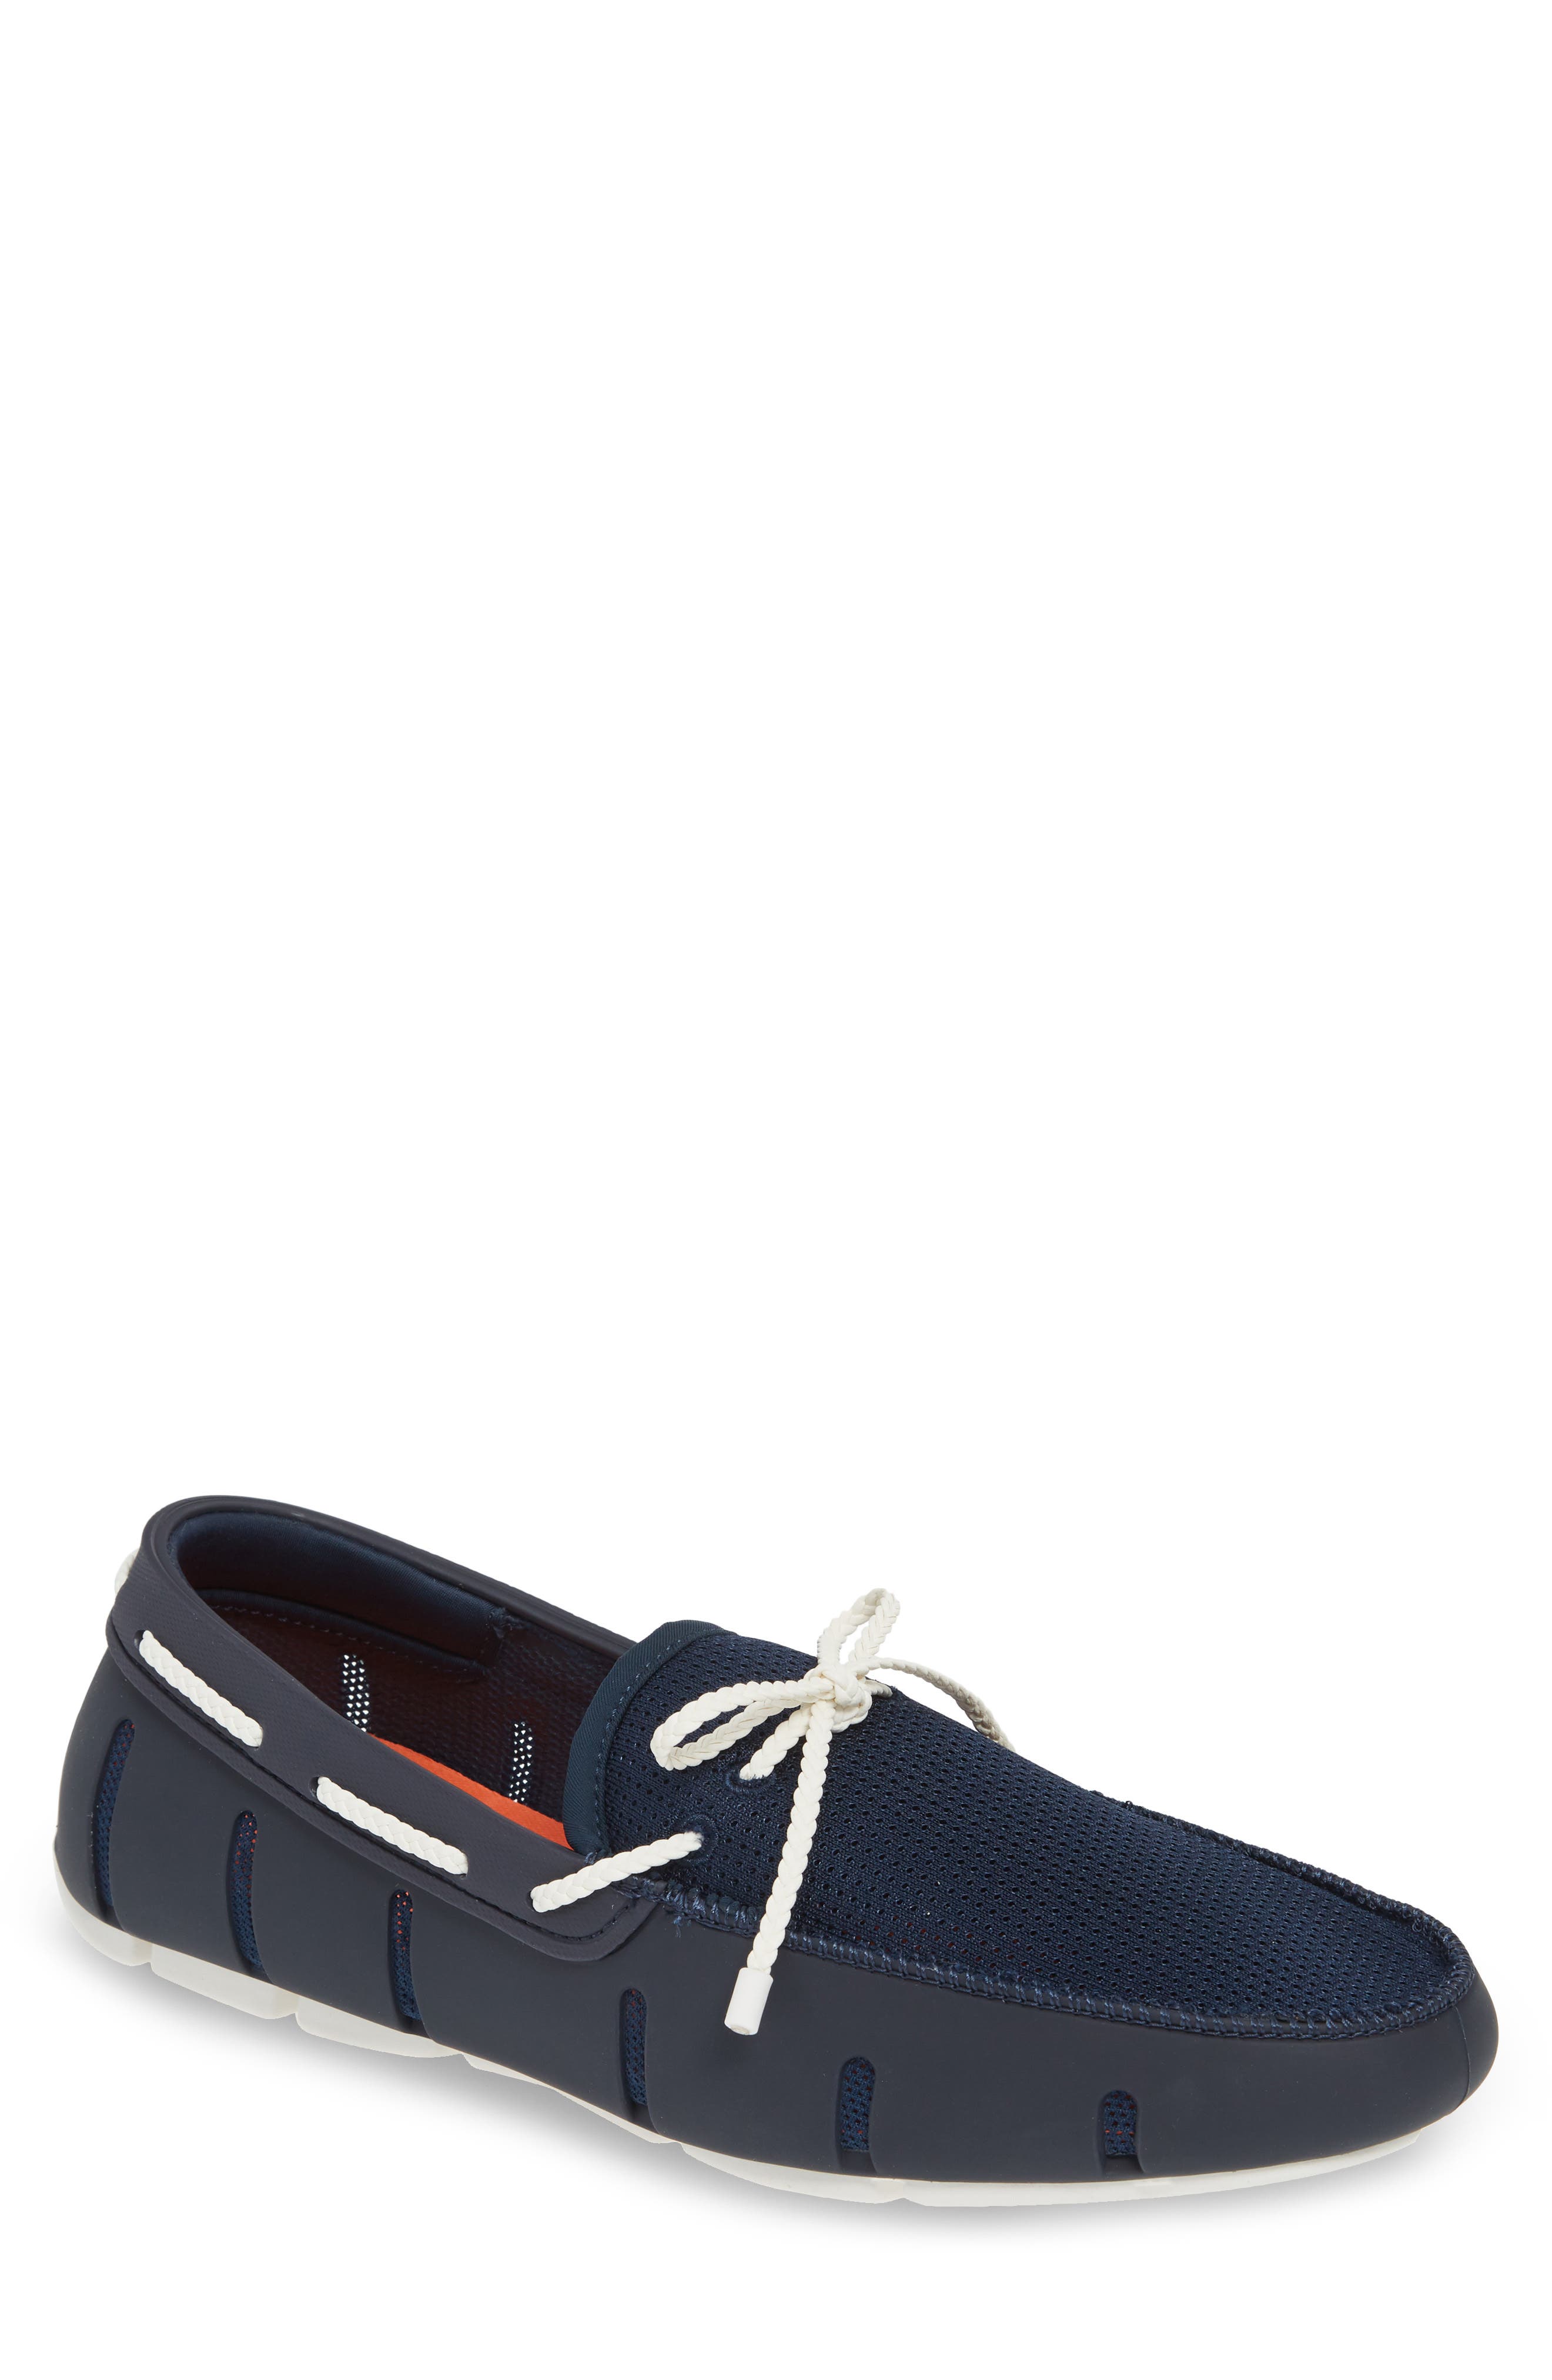 swims loafer sale